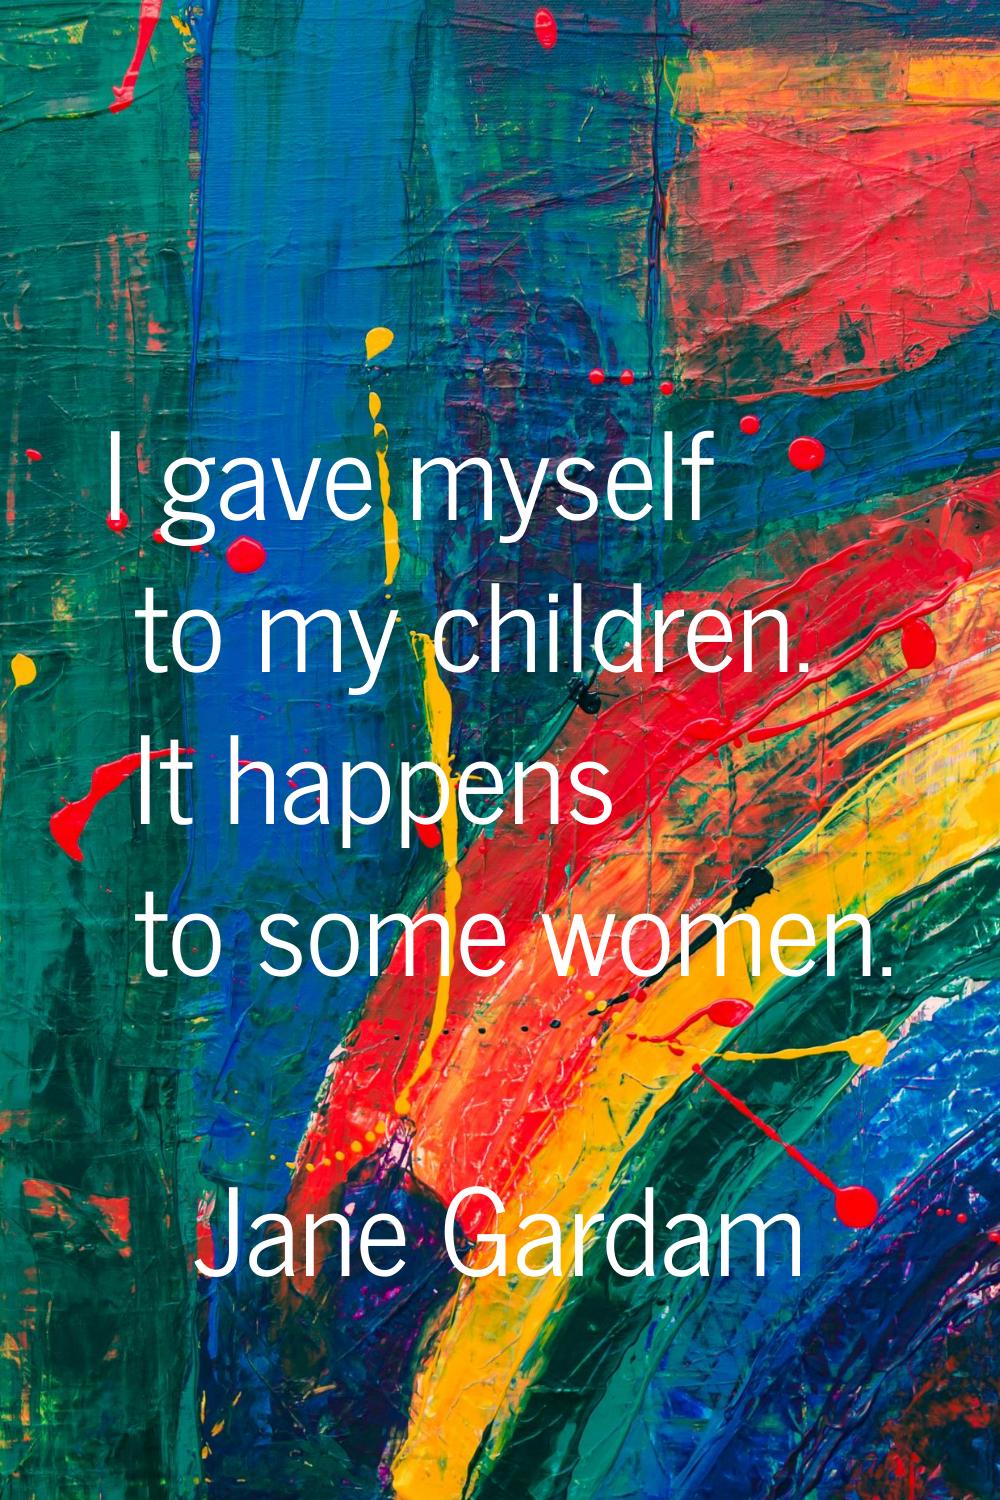 I gave myself to my children. It happens to some women.